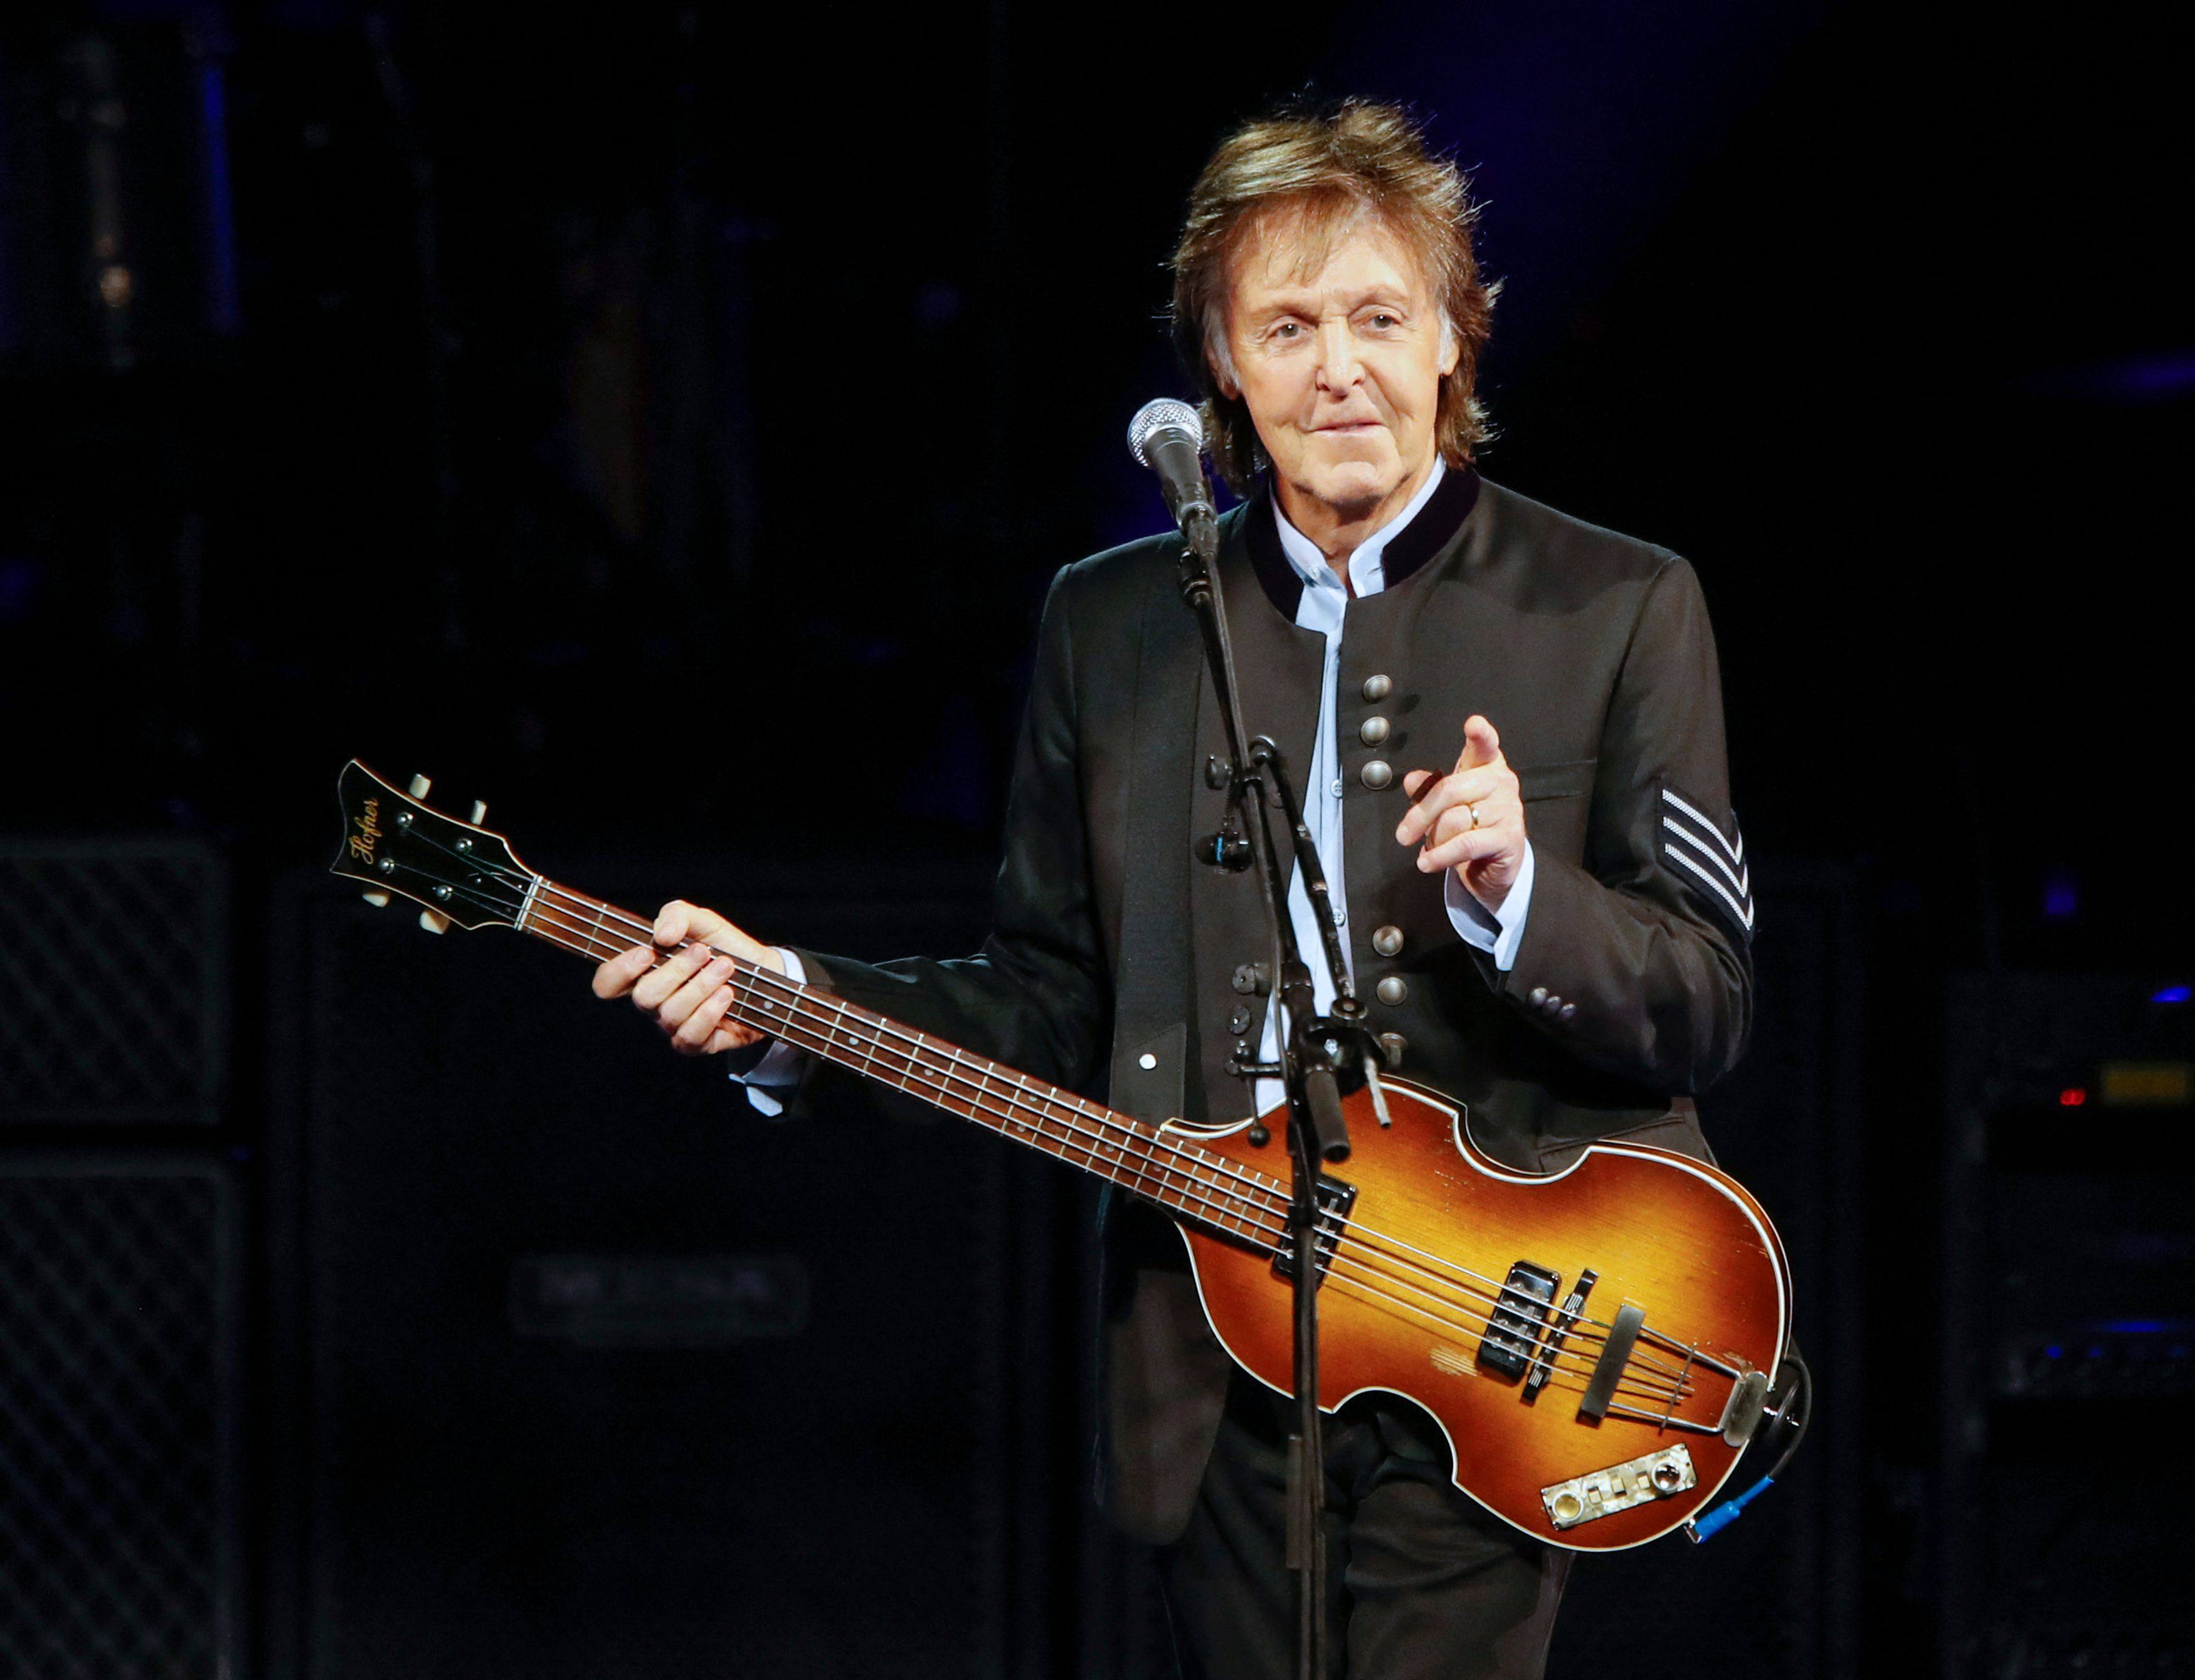 3 lifelong Beatles fans seek to find missing Paul McCartney guitar and  solve greatest mystery in rock and roll - CBS News